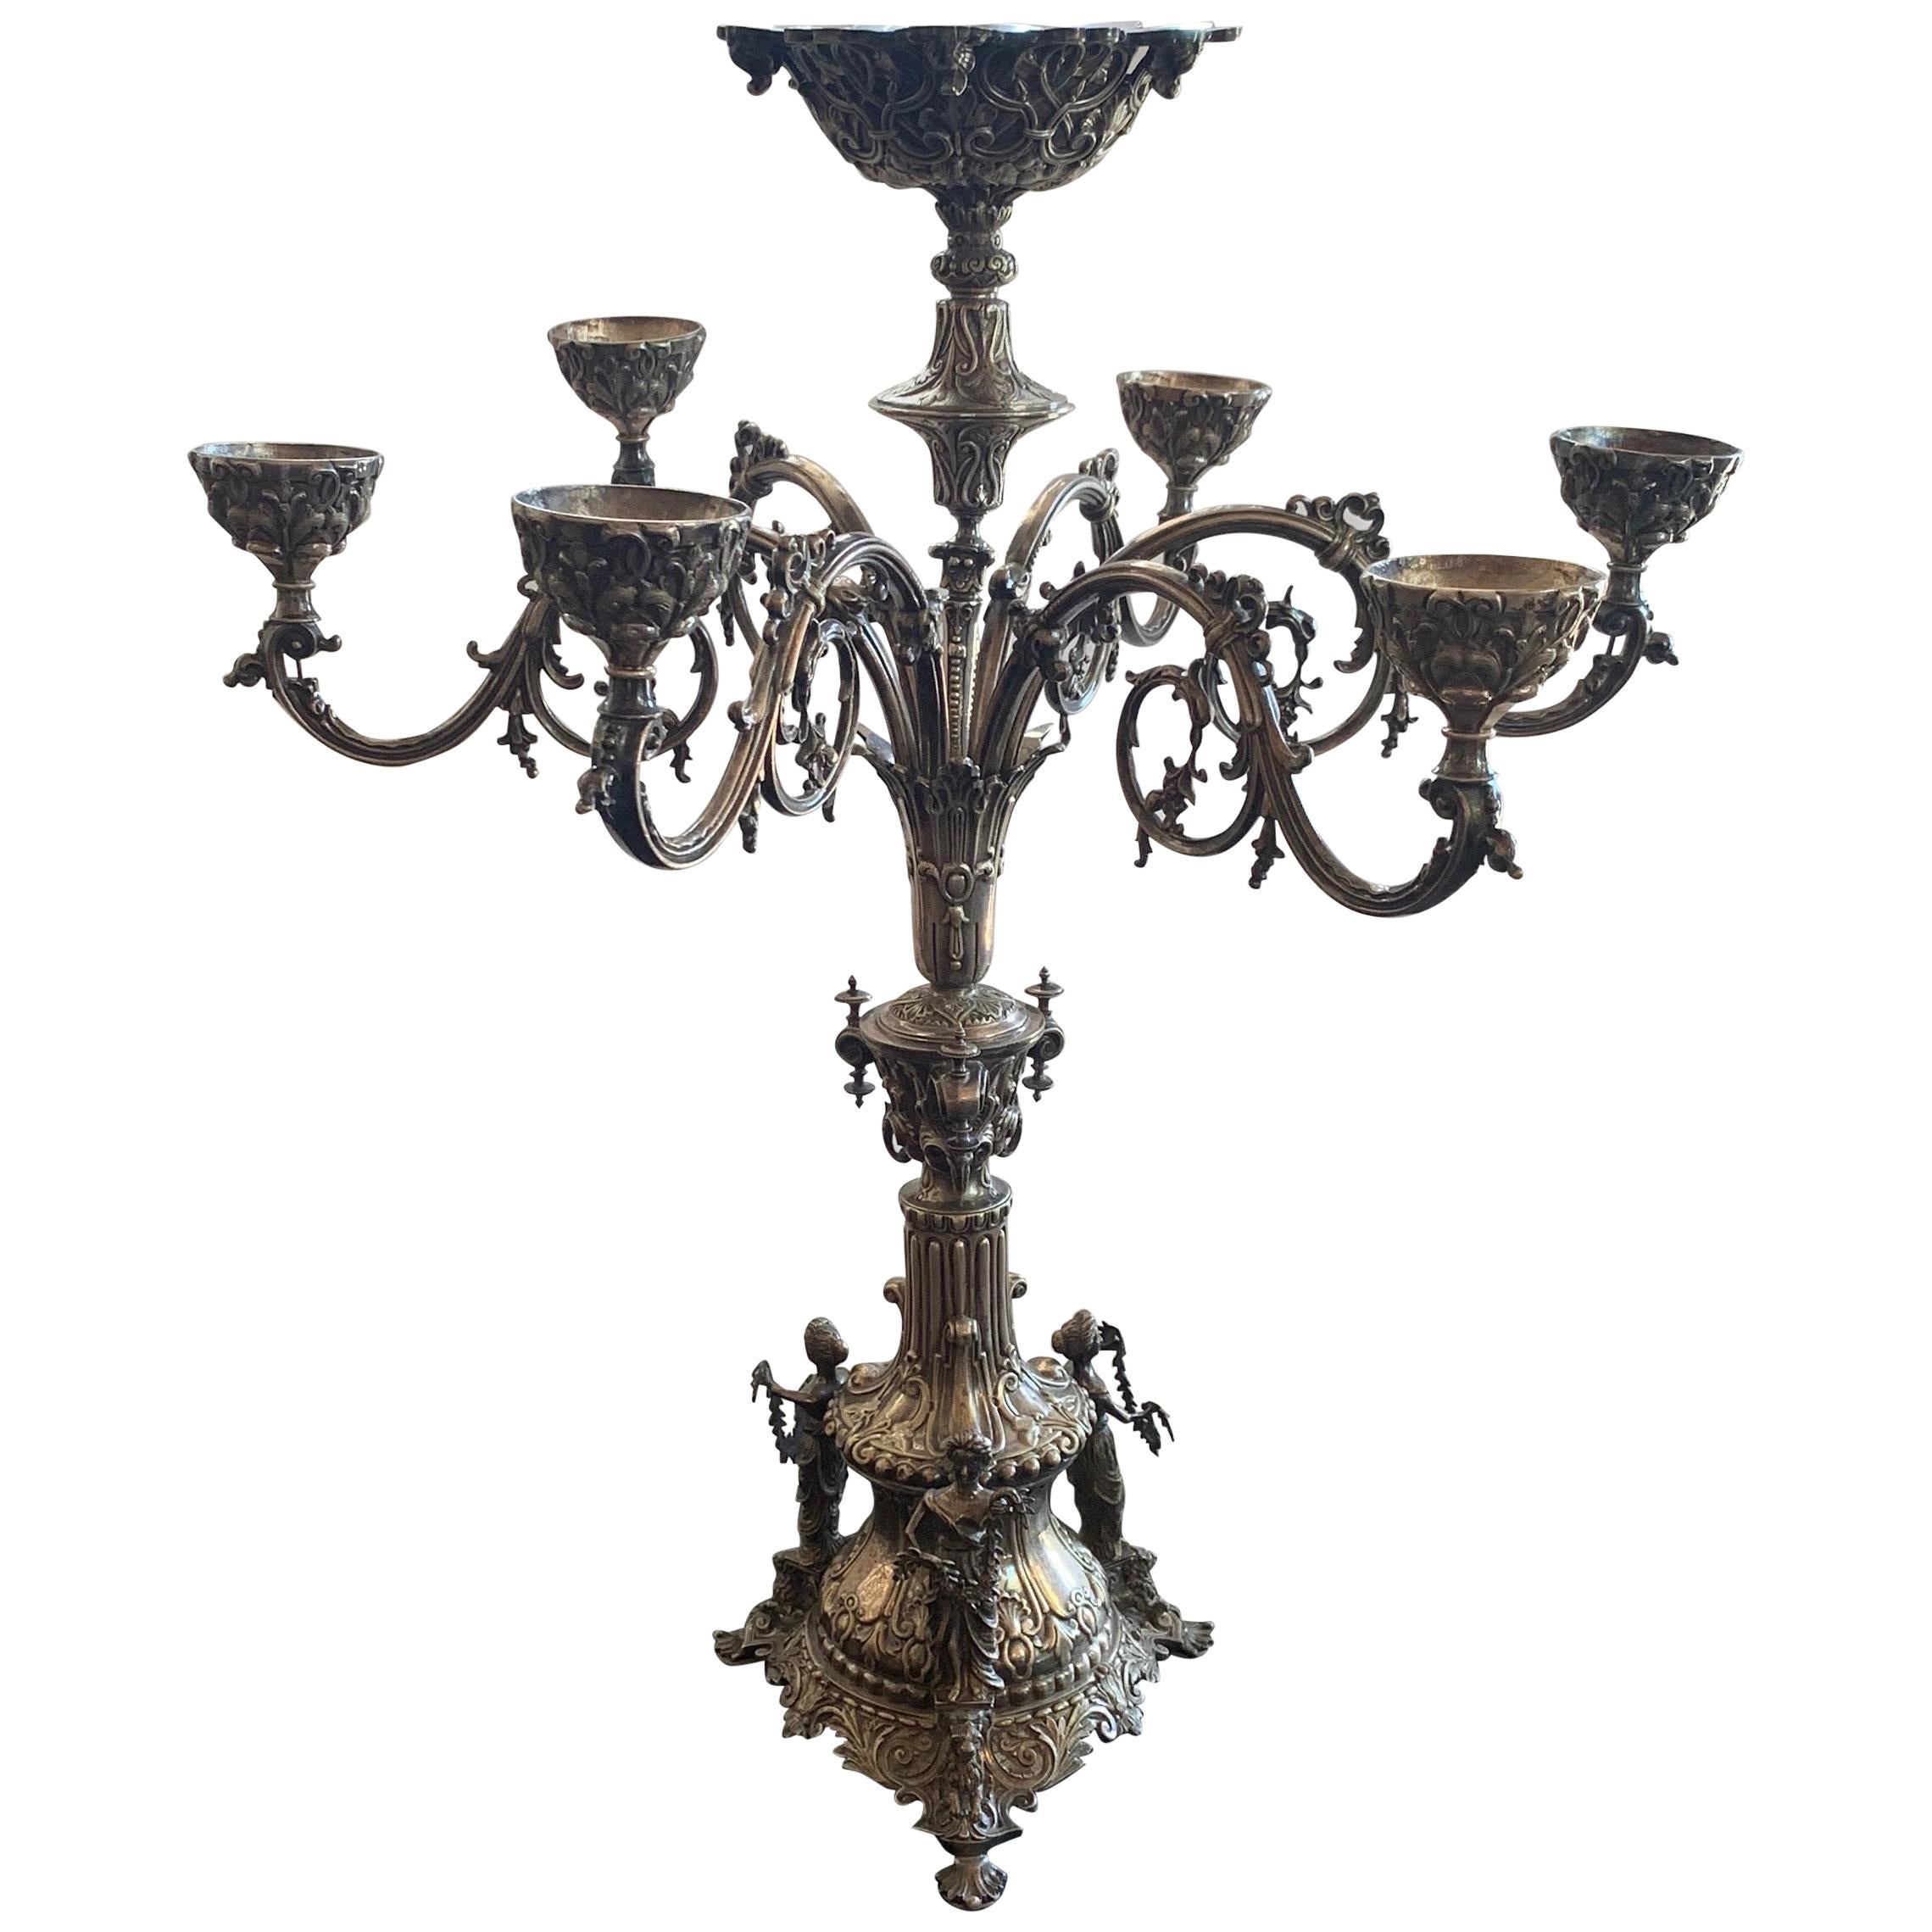 Monumental Fine Neoclassical 3 Figure English Silver Plated Epergne Candelabra